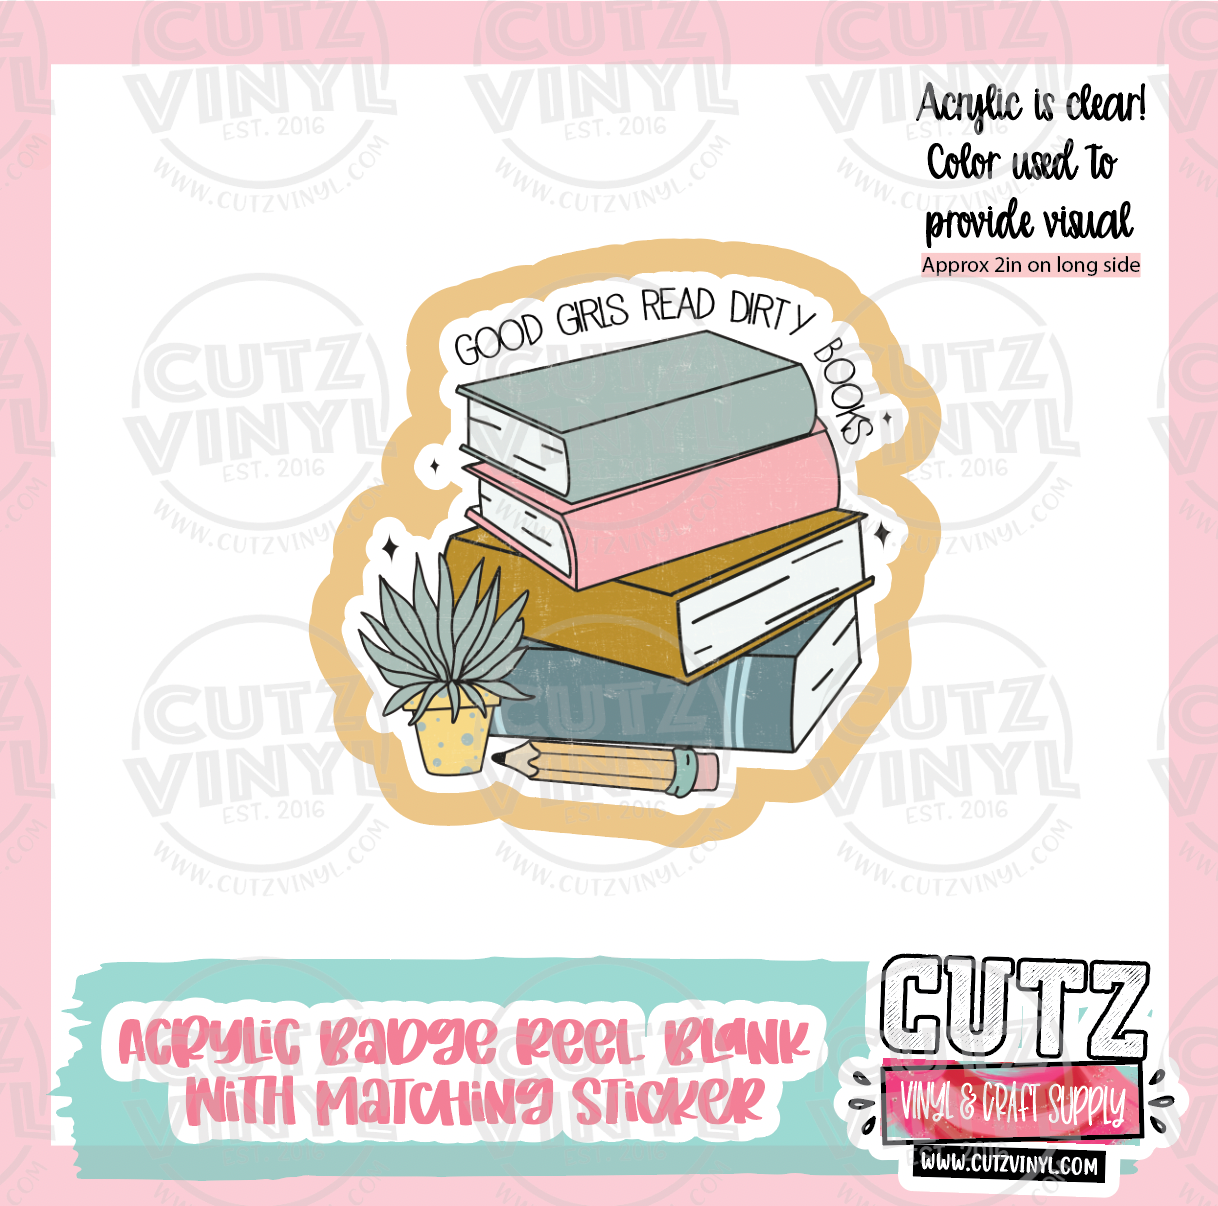 Dirty Books - Acrylic Badge Reel Blank and Matching Sticker